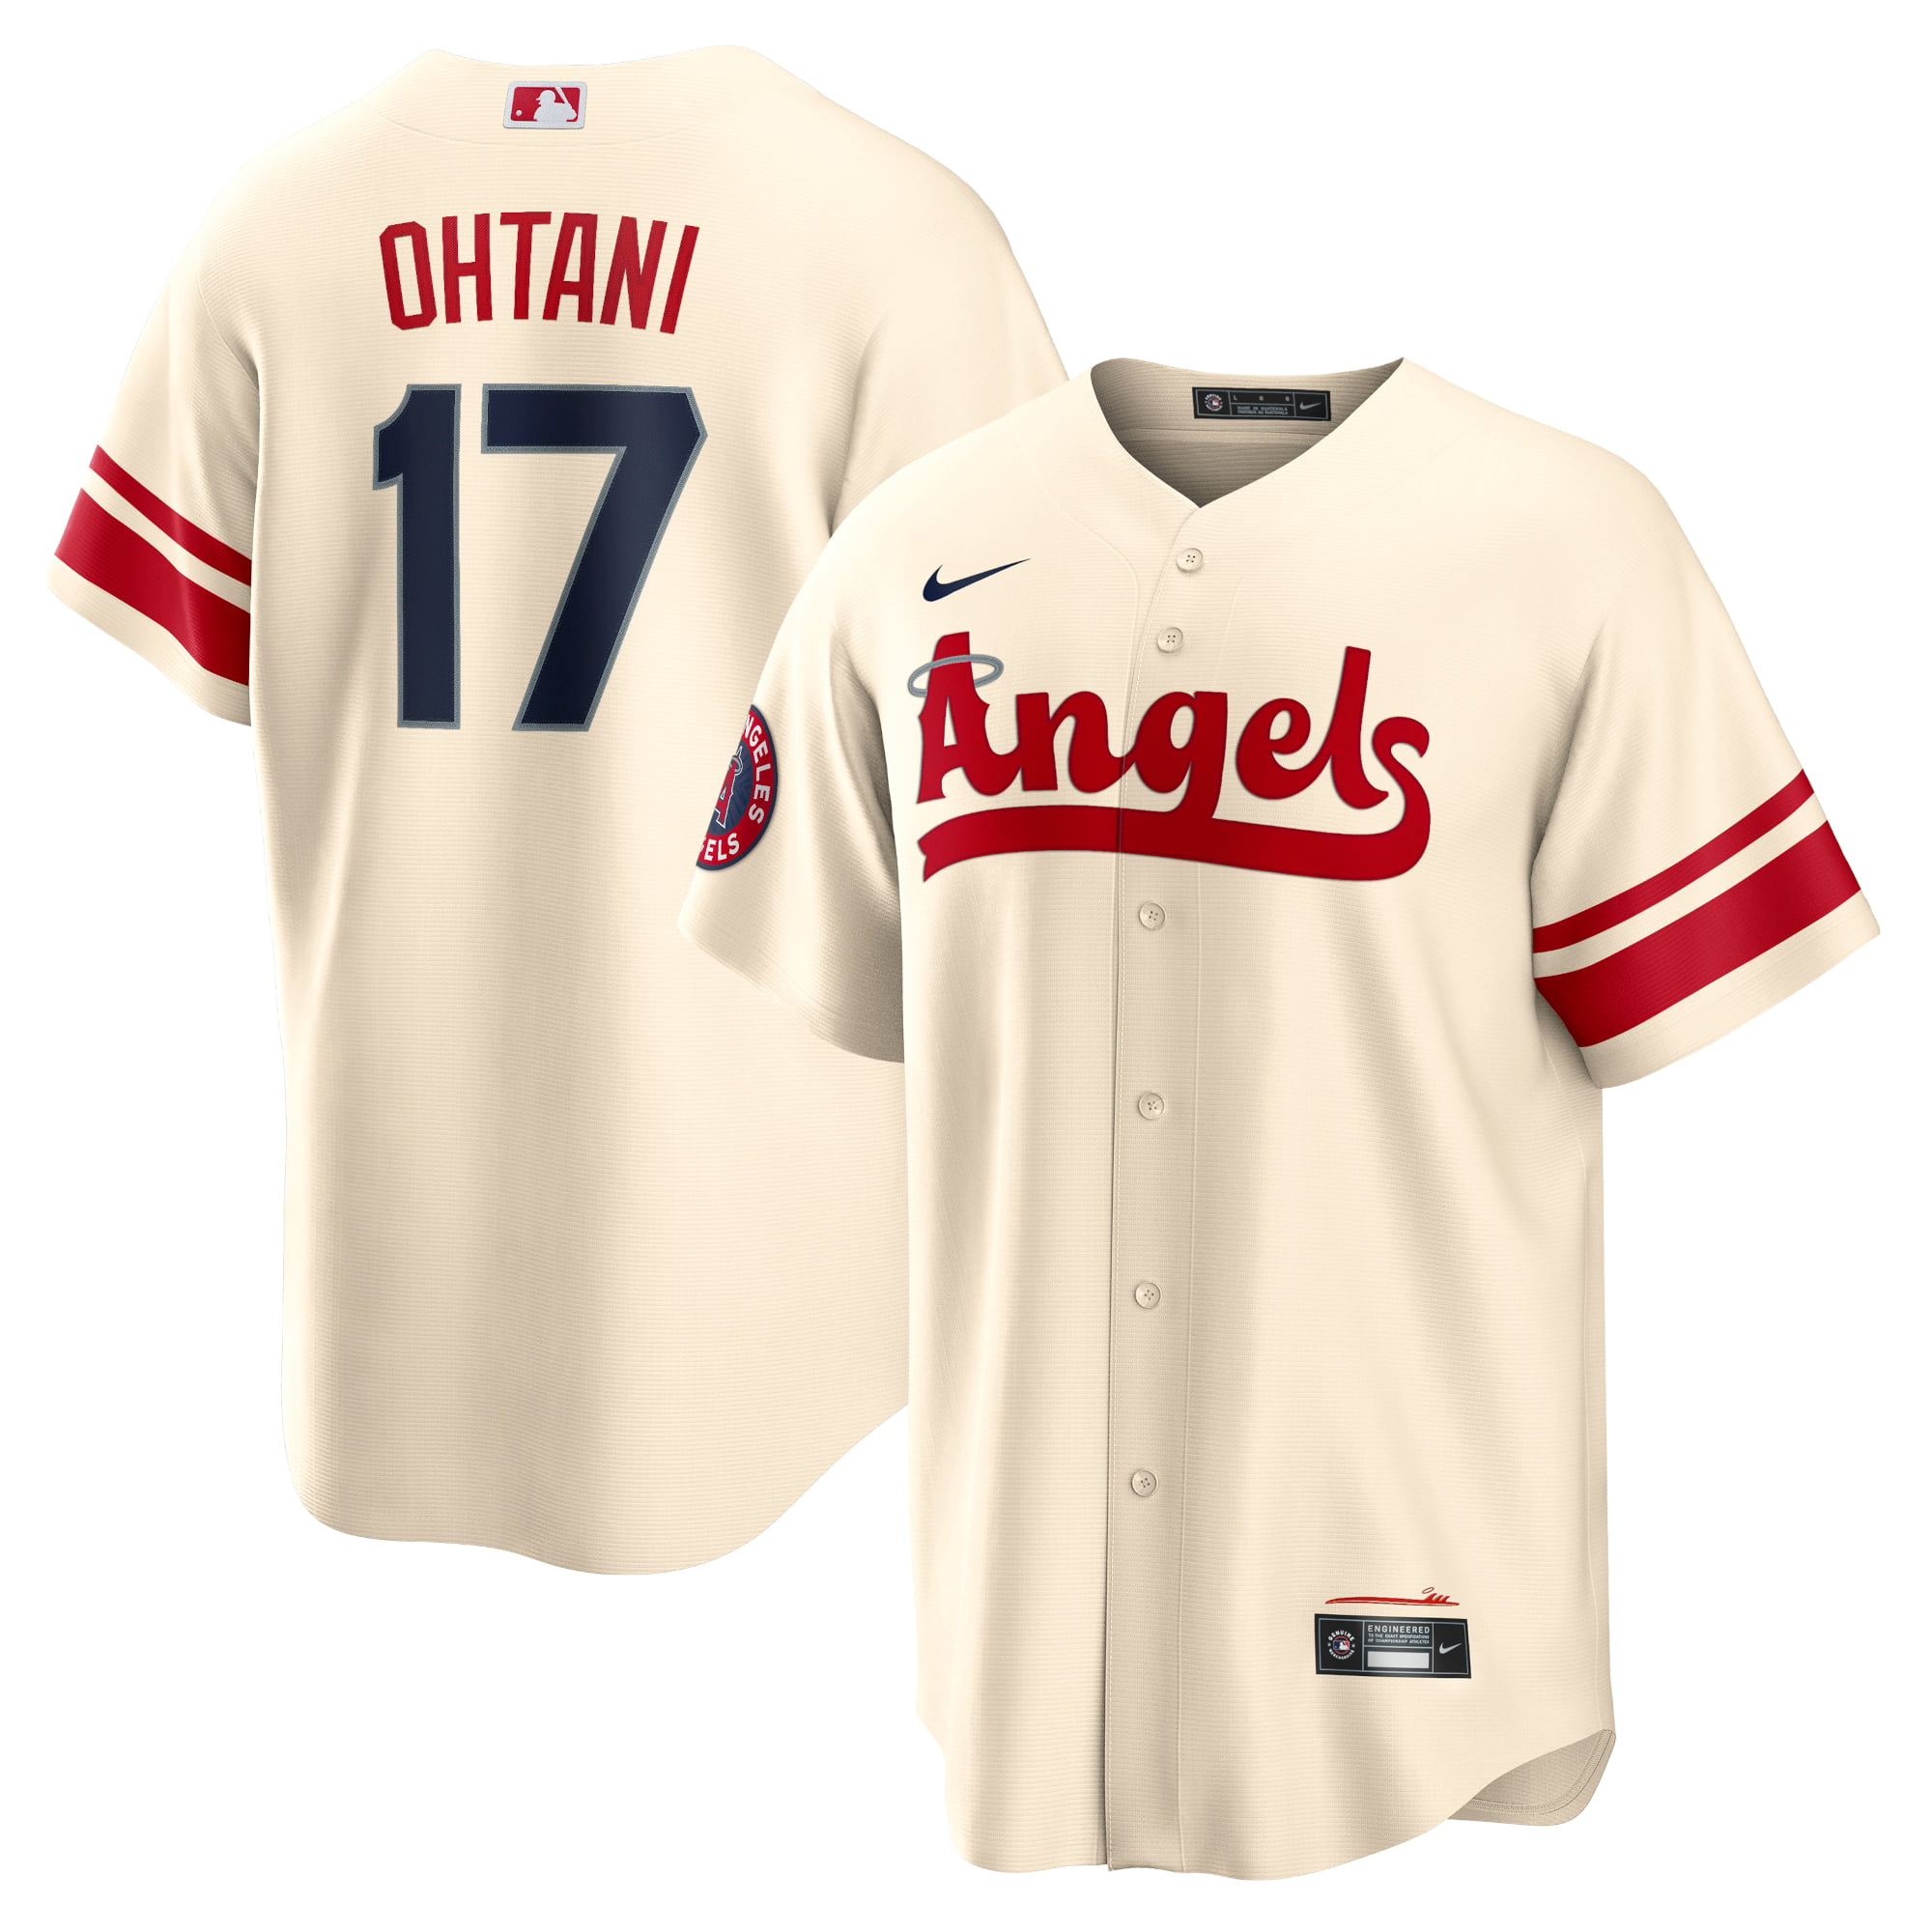 Phillies' cream-colored alternate uniforms have yet to arrive for 2022